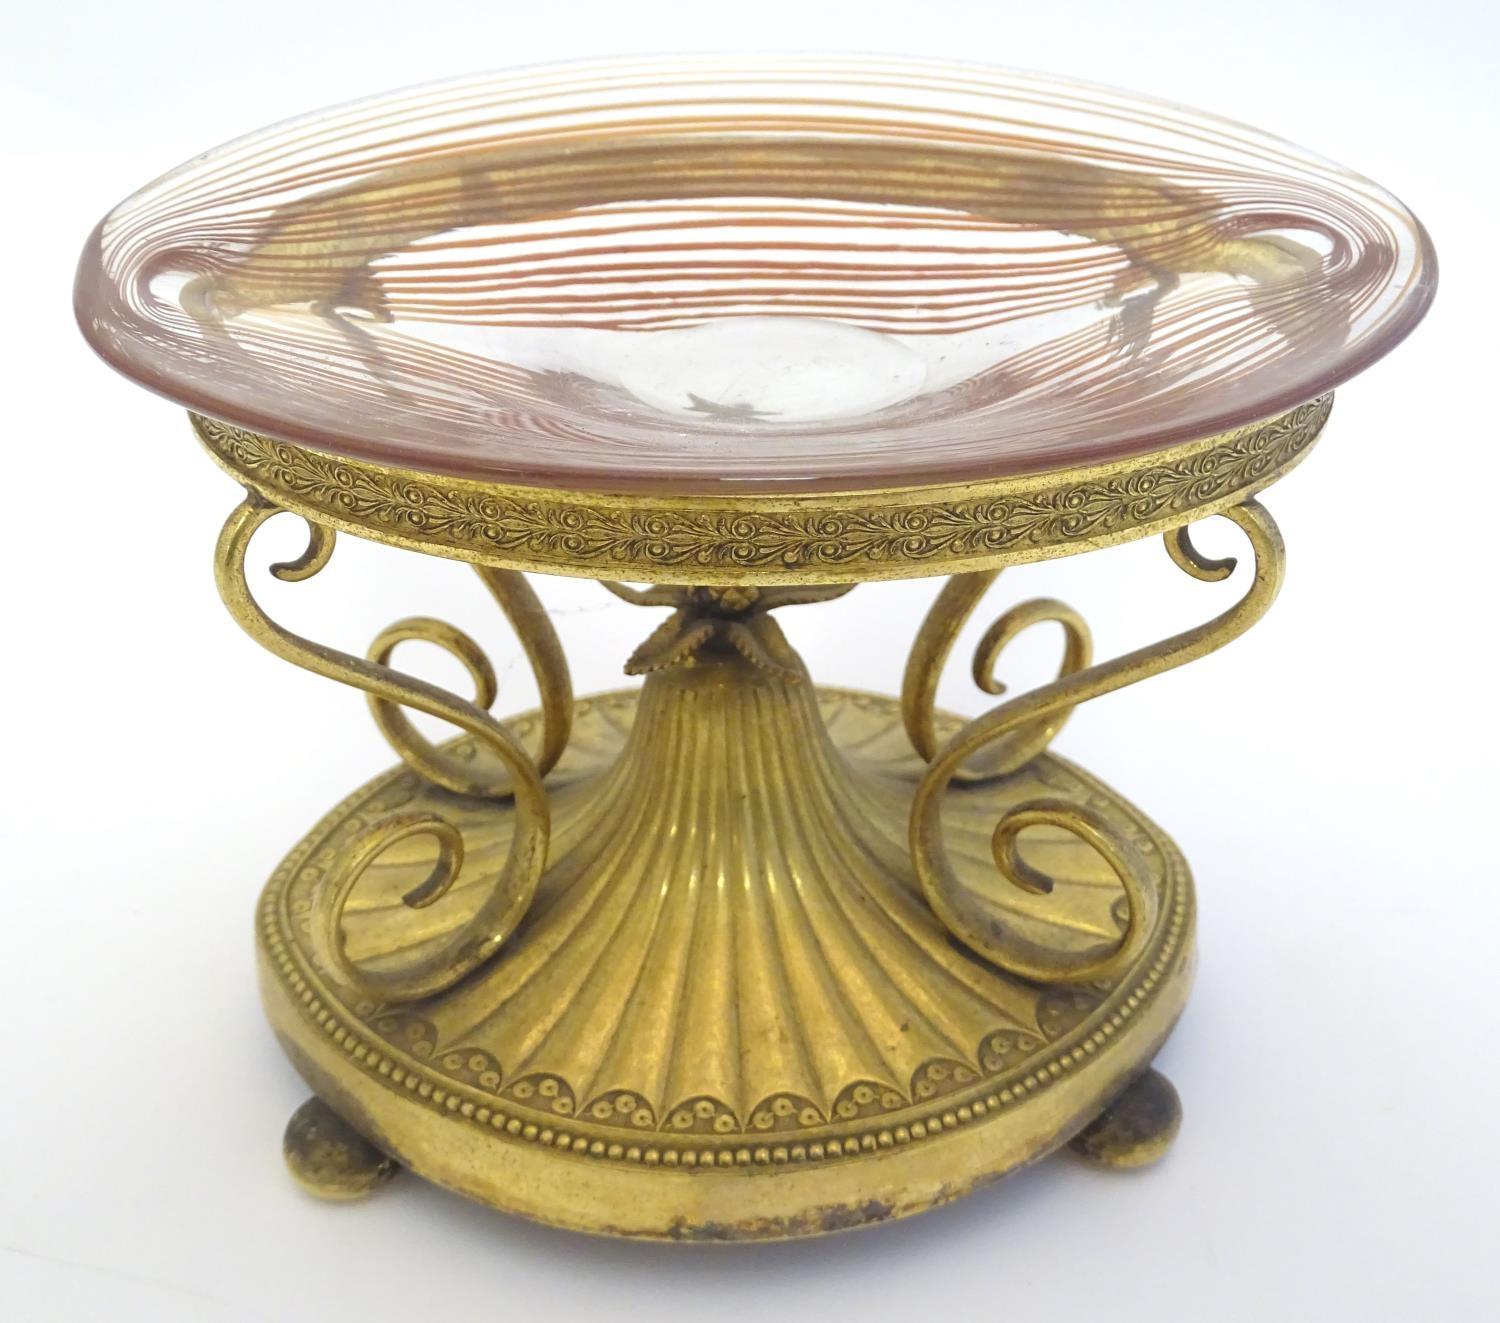 A c.1903 Elkington & Co. gilt metal oval centrepiece stand with scrolling decoration and central - Image 8 of 22